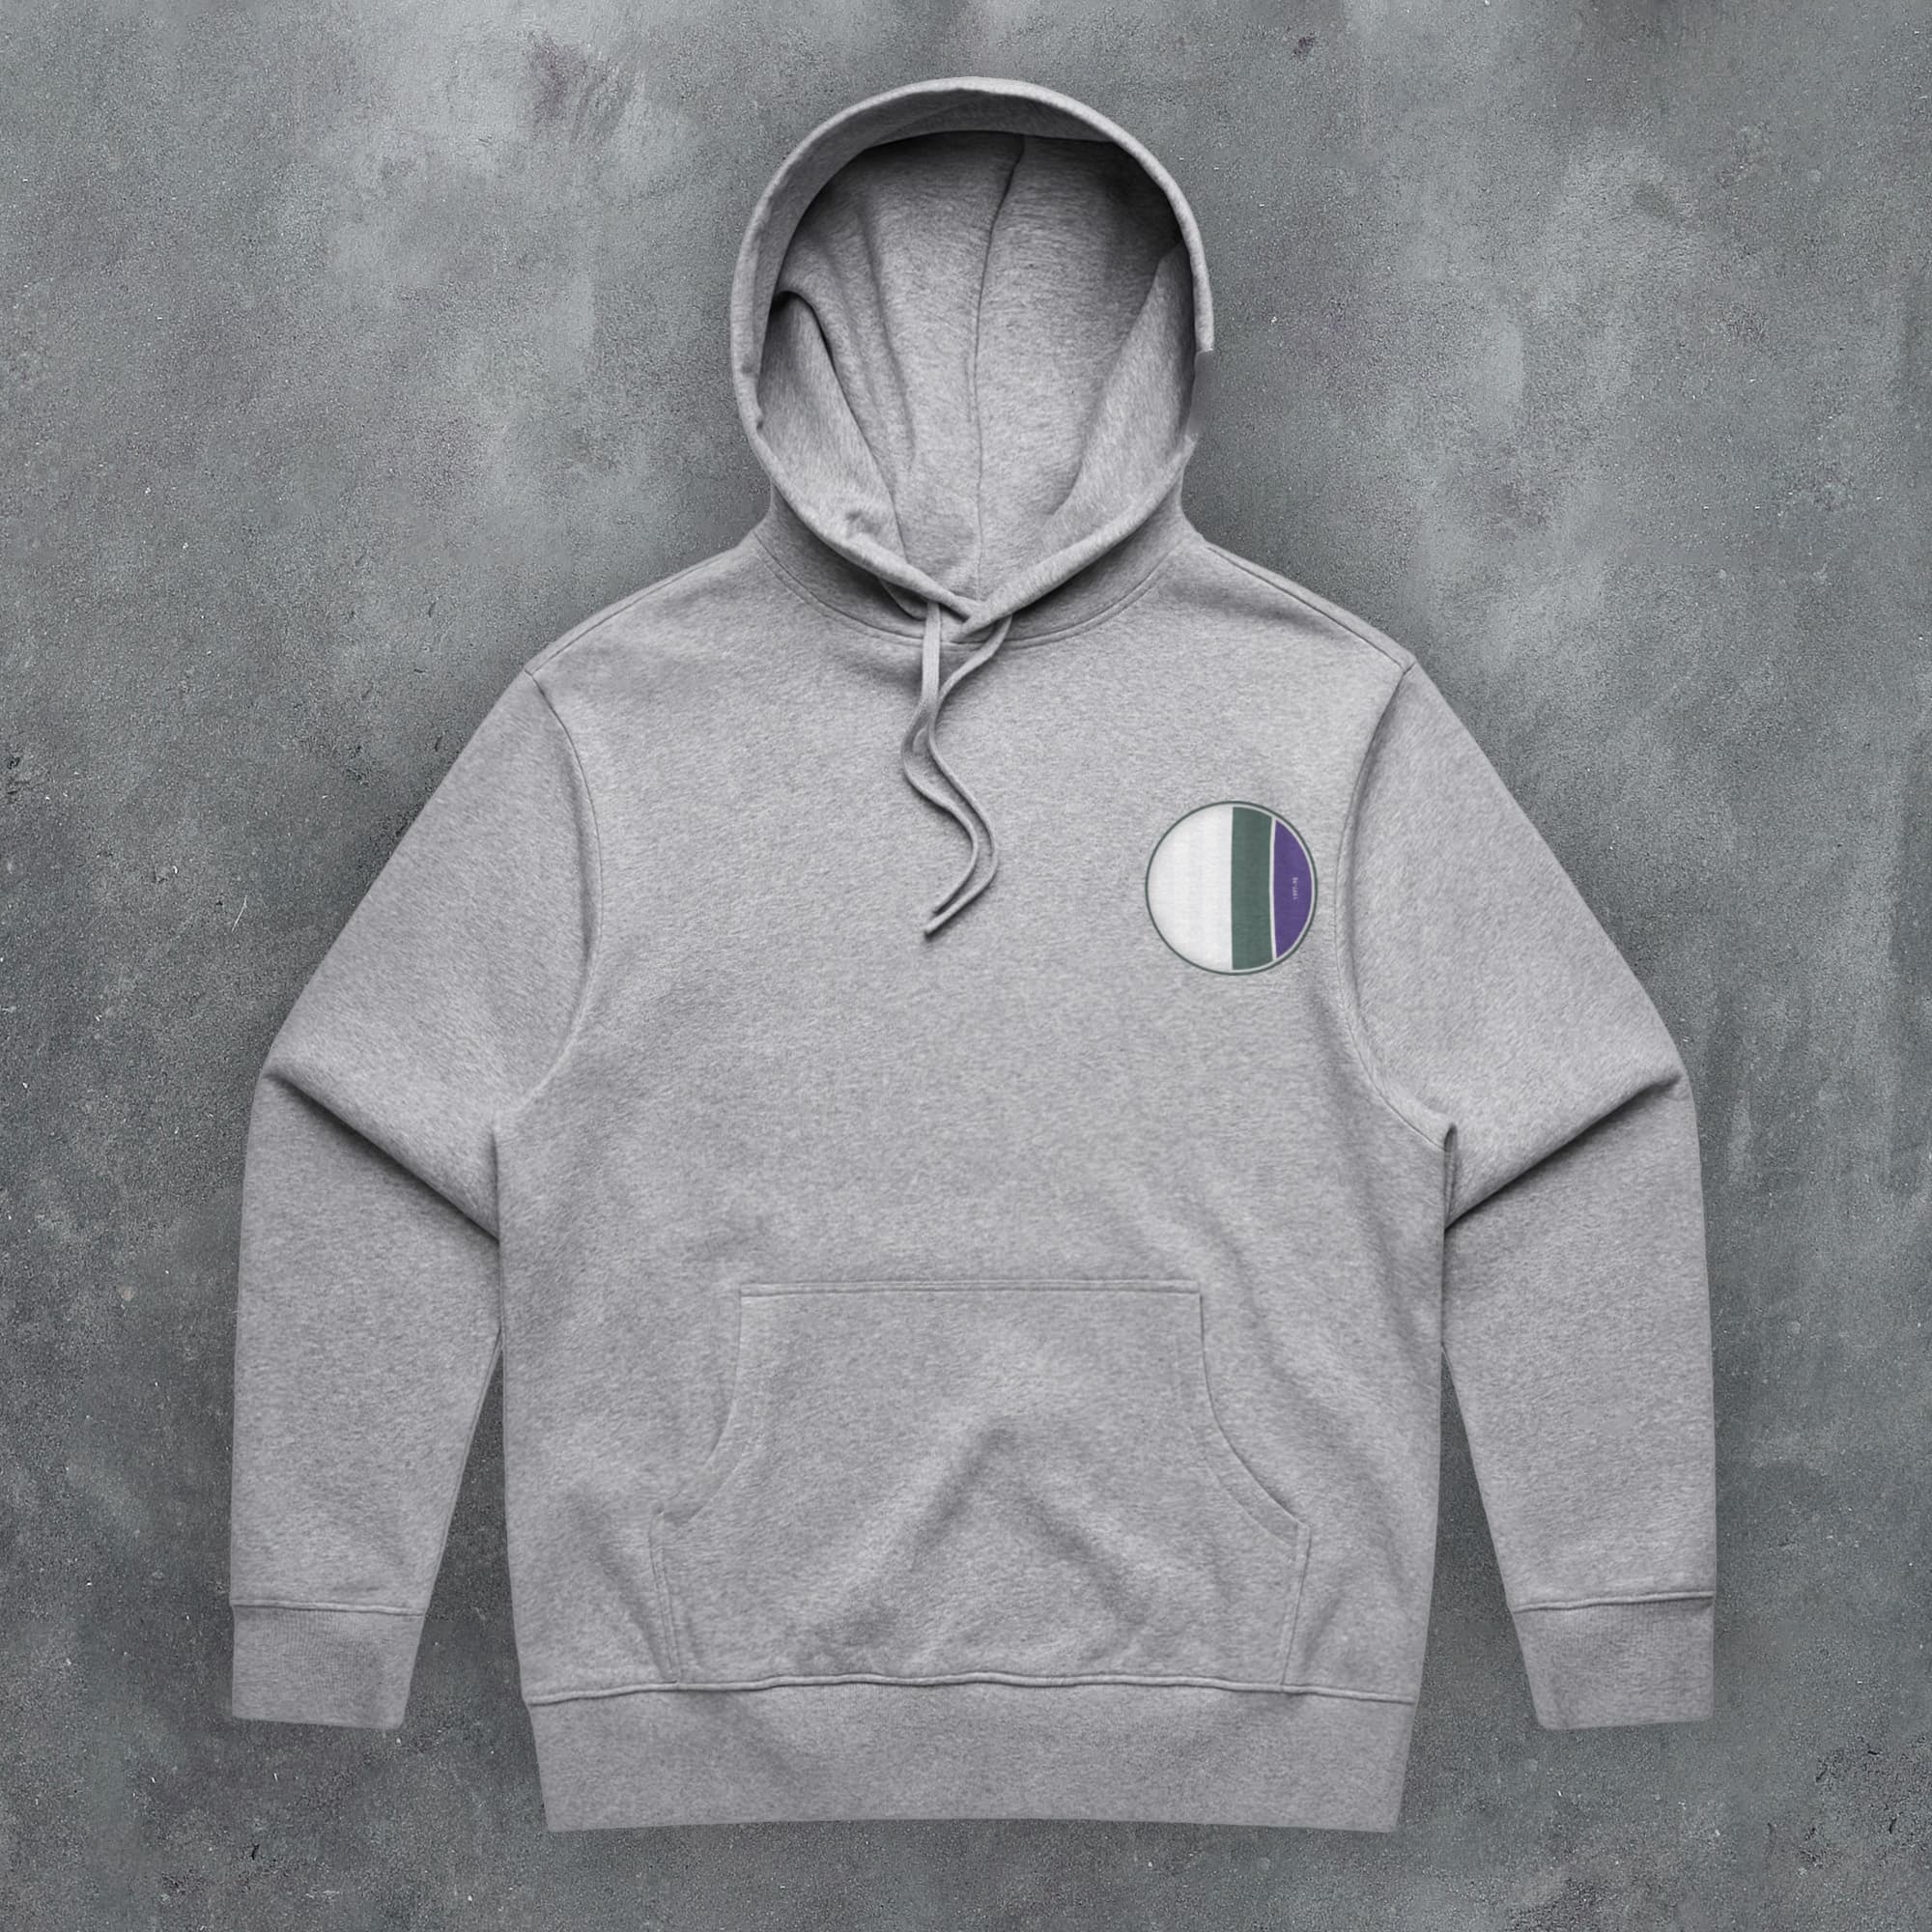 a grey hoodie with a green, white and blue patch on it